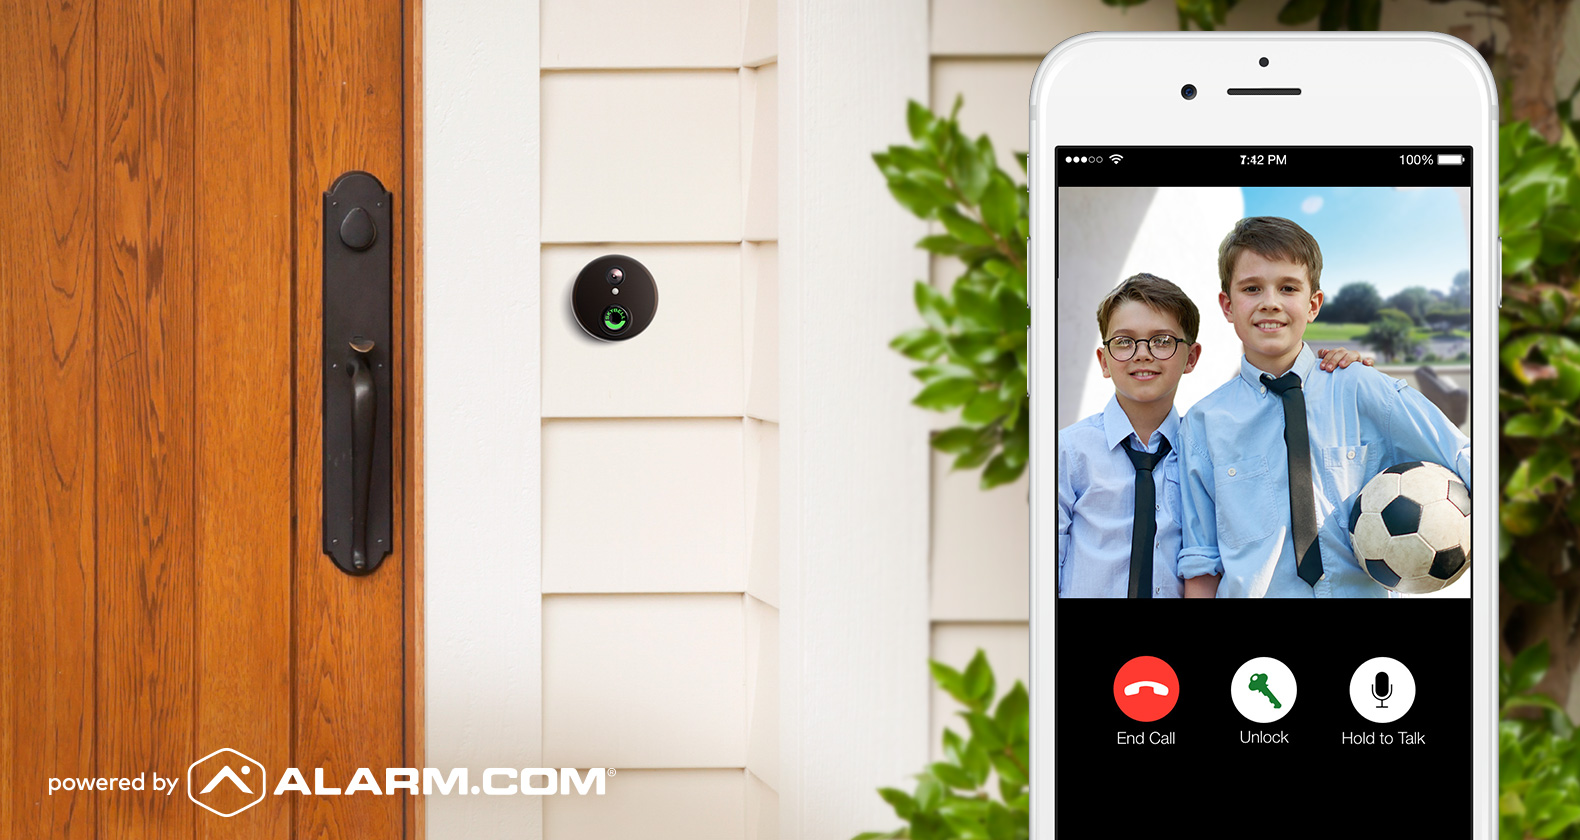 SkyBell Video Doorbell on cell phone